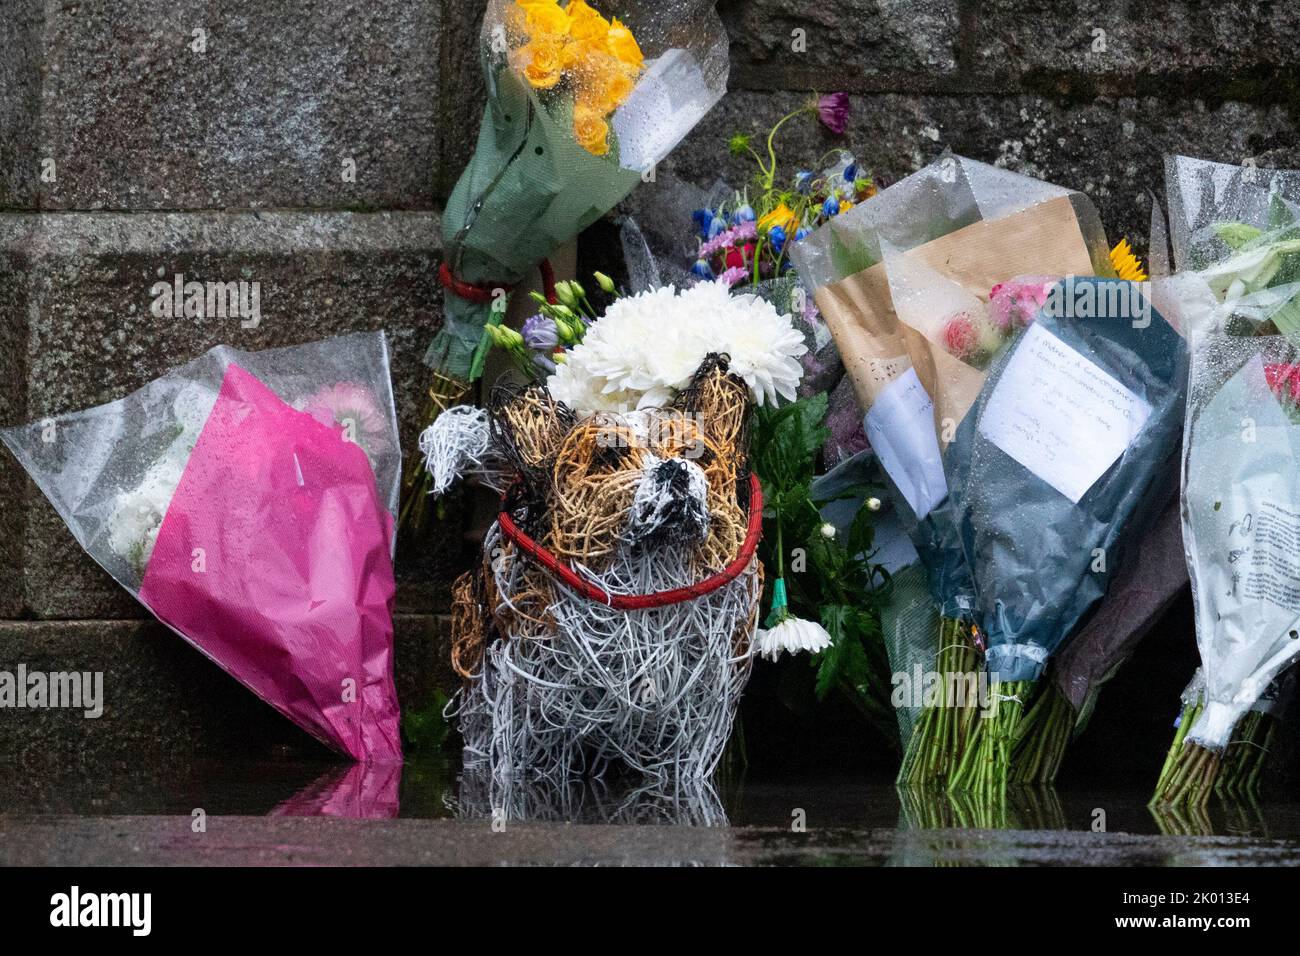 Balmoral, Scotland, UK. 9th September 2022. Members of the public laying flowers at the entrance gates to Balmoral Castle following news of death of HRH Queen Elizabeth II yesterday. Pic; Floral tribute in shape of Corgi dog.   Iain Masterton/Alamy Live News Stock Photo